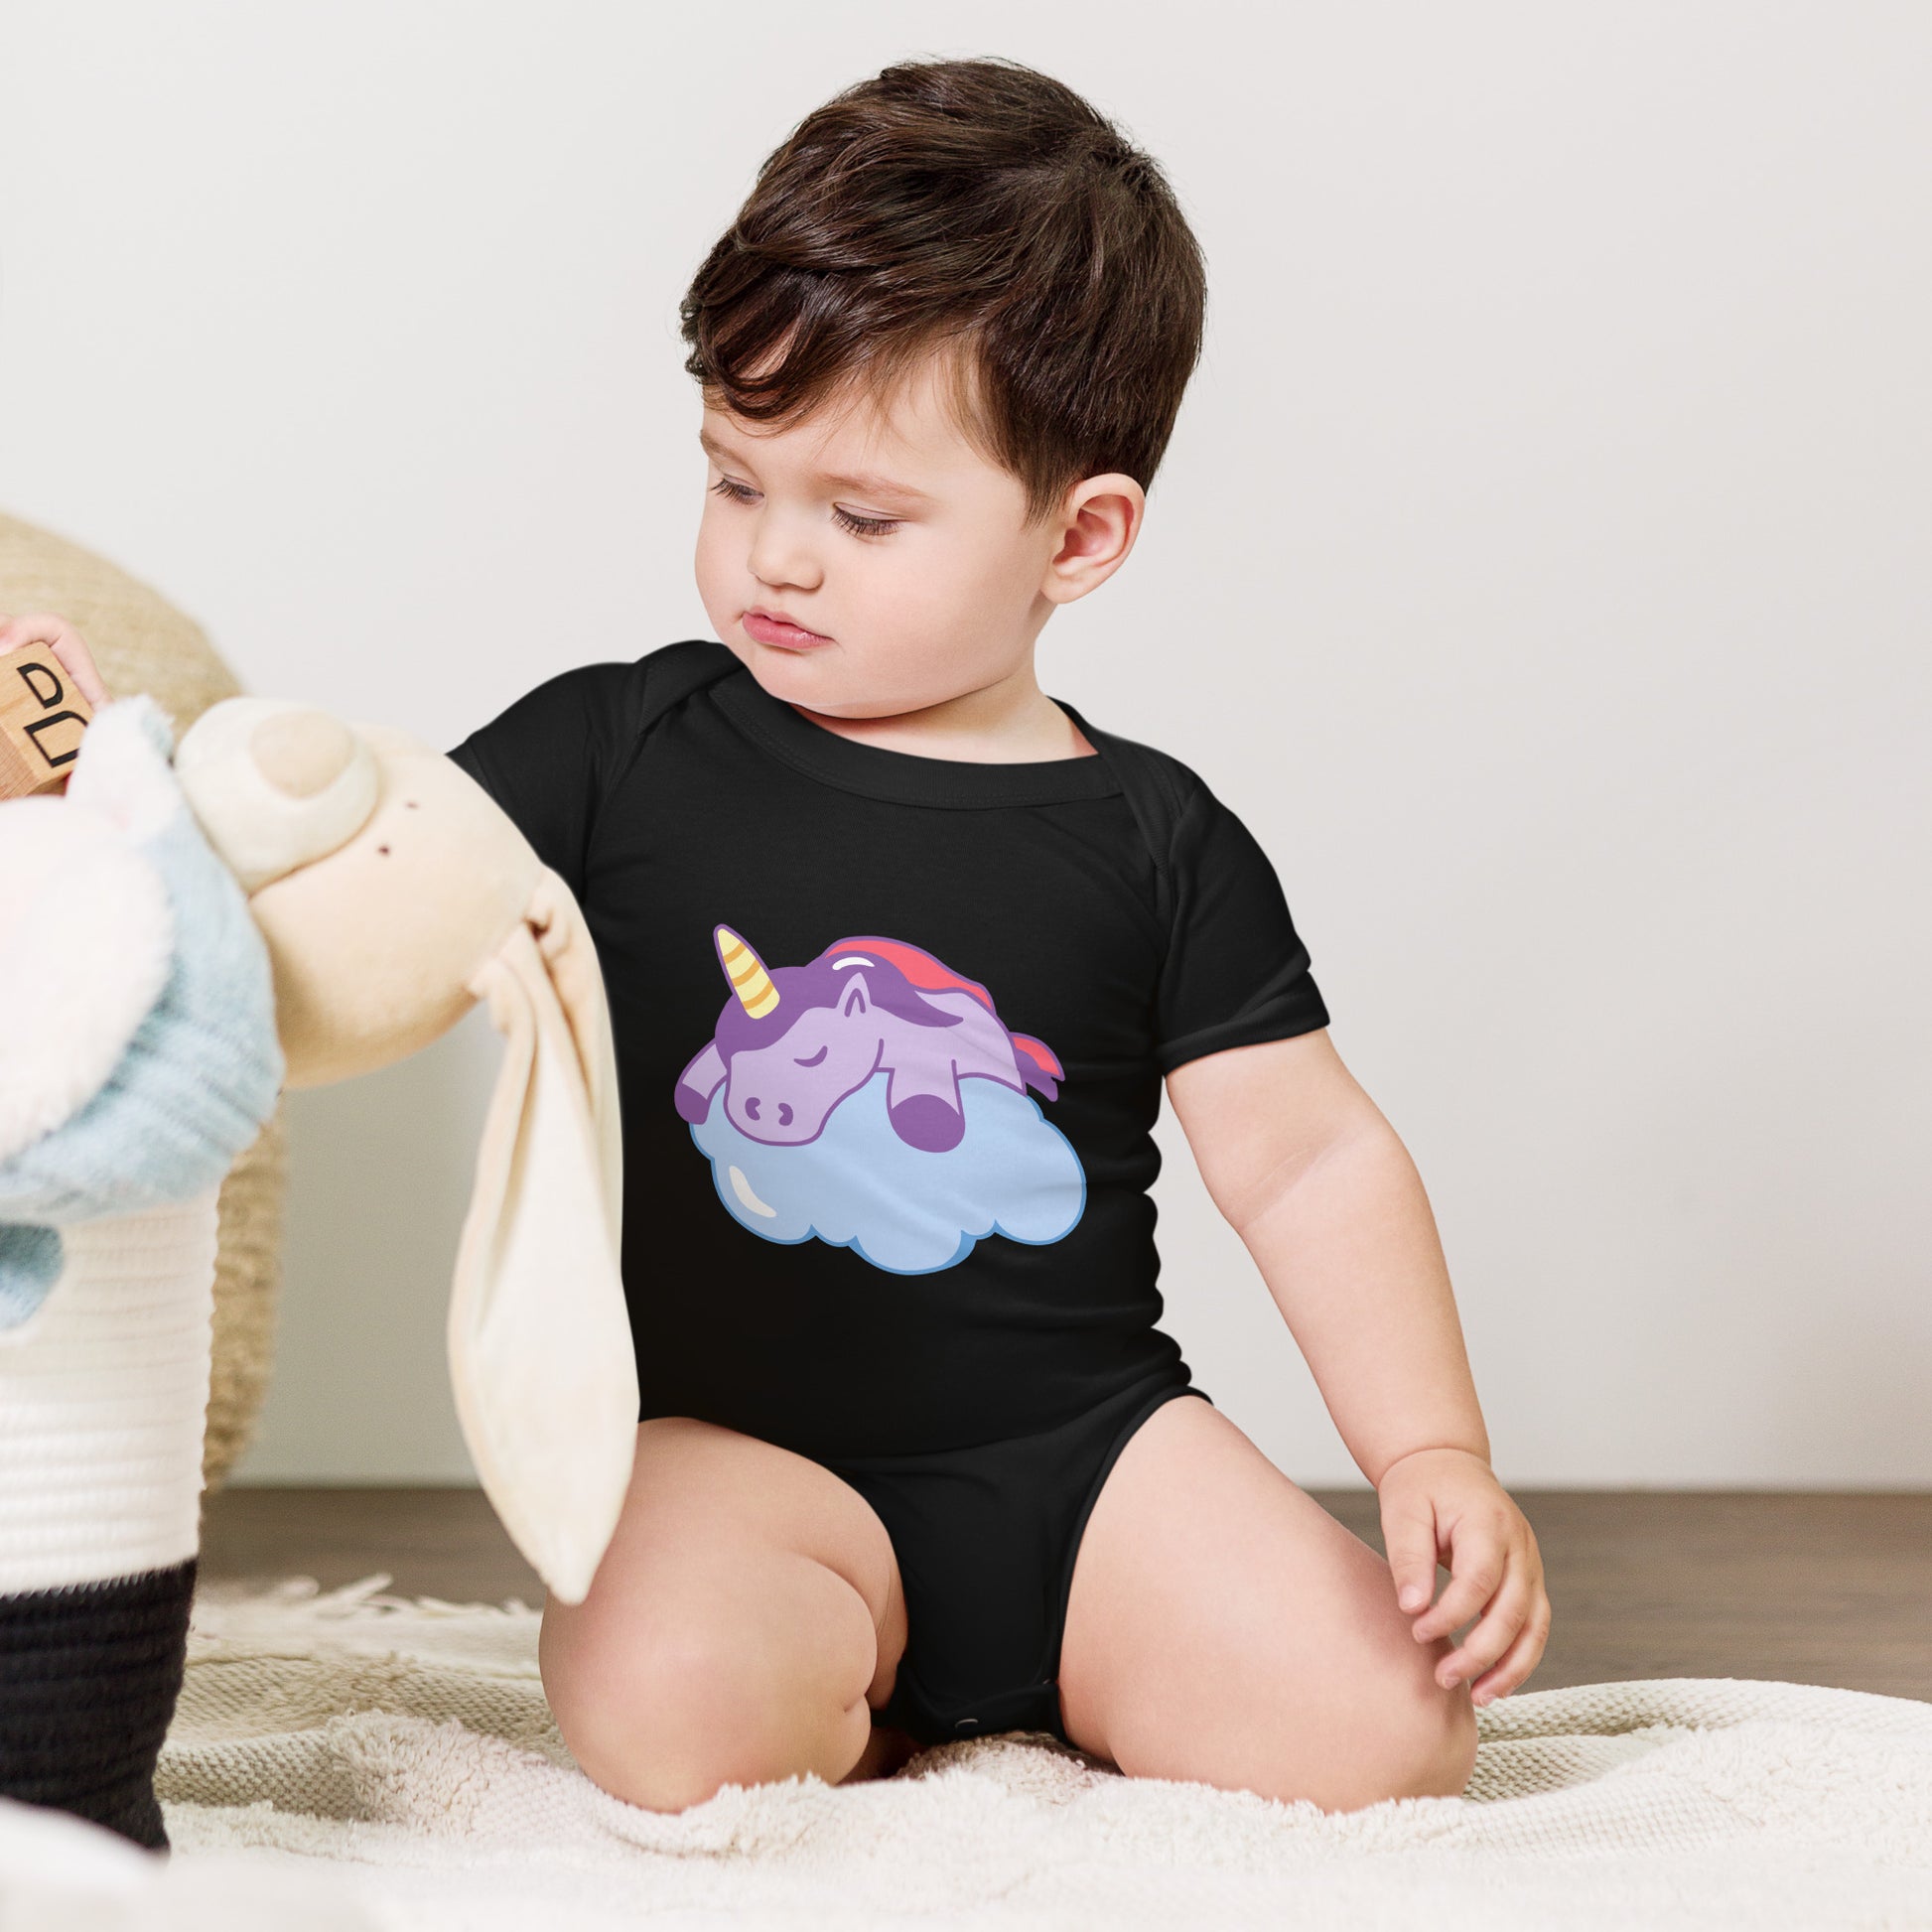 baby with a black bodysuit with a print of a sleeping unicorn on a cloud